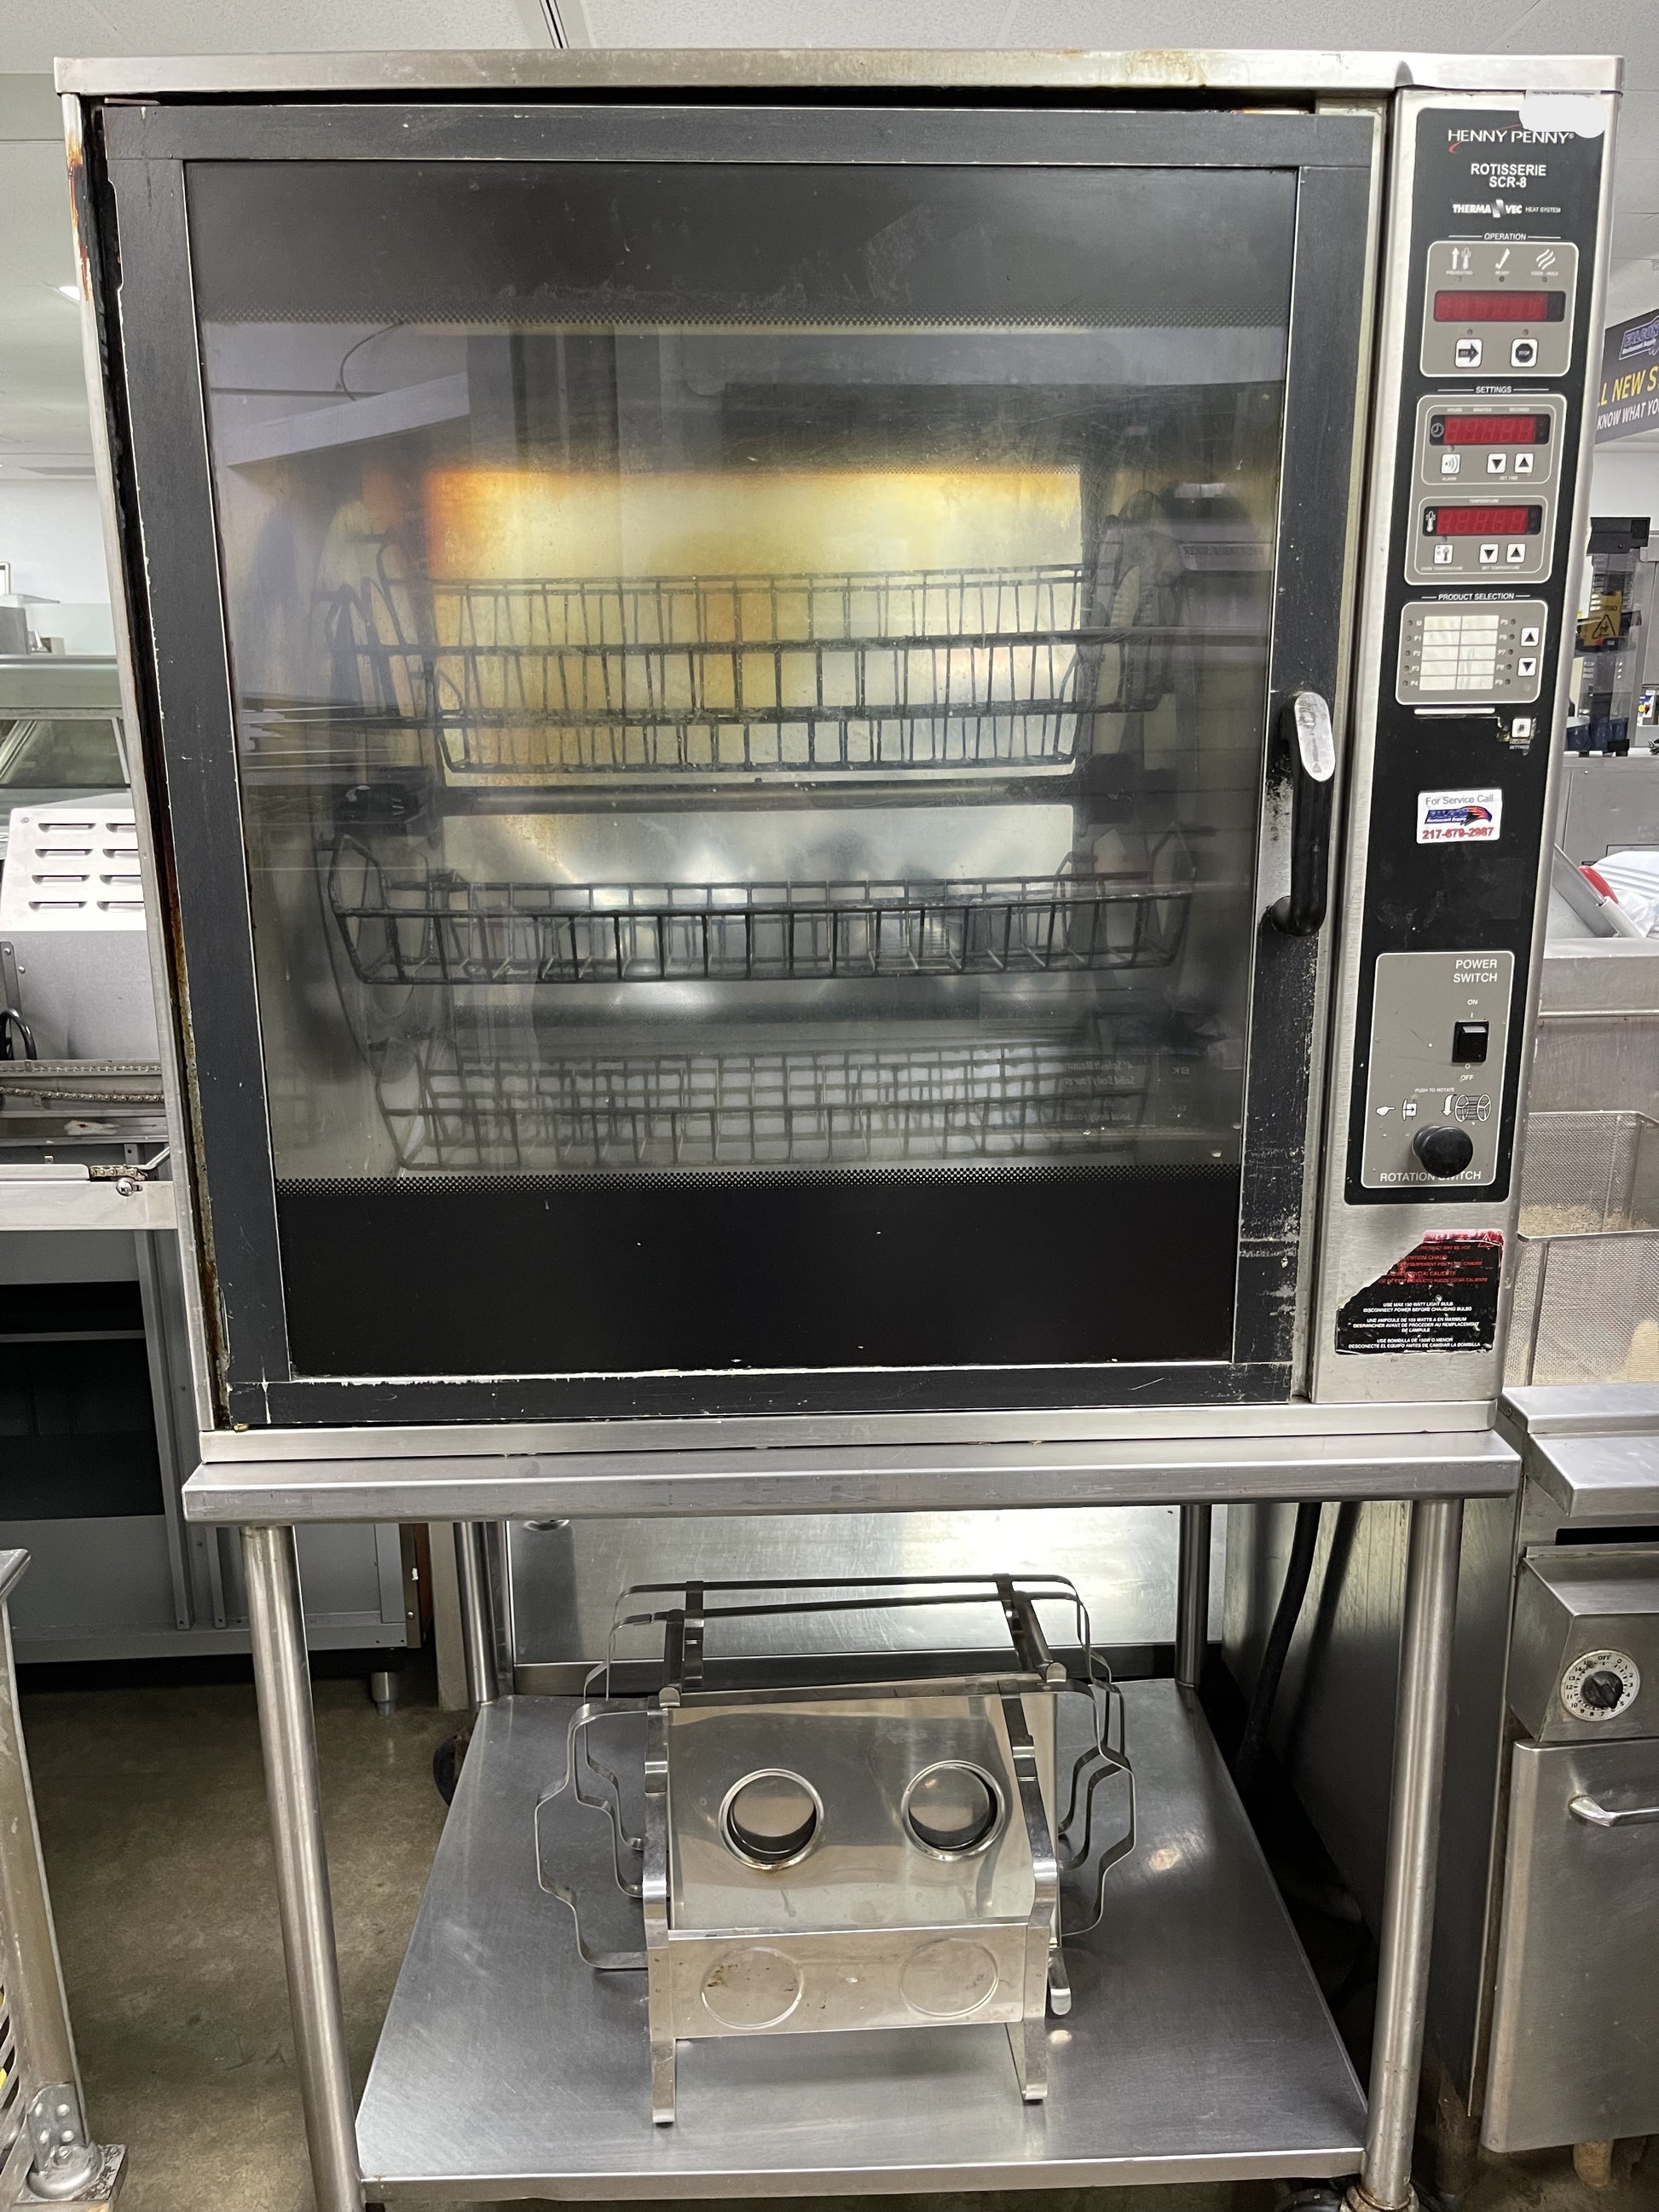 AR-7T Electric Countertop Rotisserie Oven